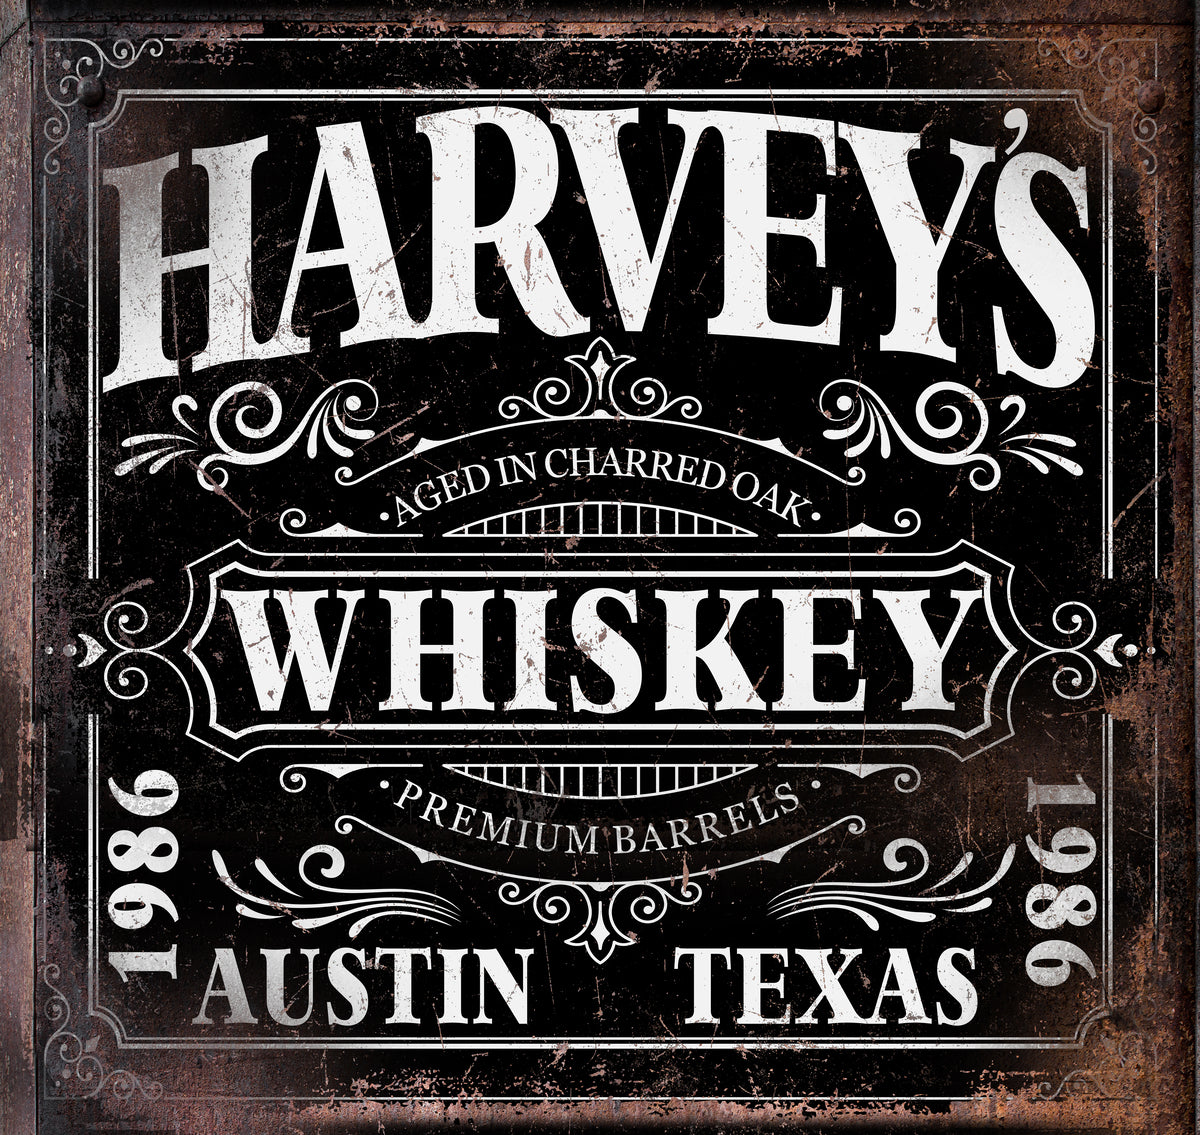 Top Shelf Whiskey Bar Signs made on black distressed background with words on it [Personalized Name] Whiskey, aged in charred oak premium barrels, City & State with established date on the side with a very industrial decor style.